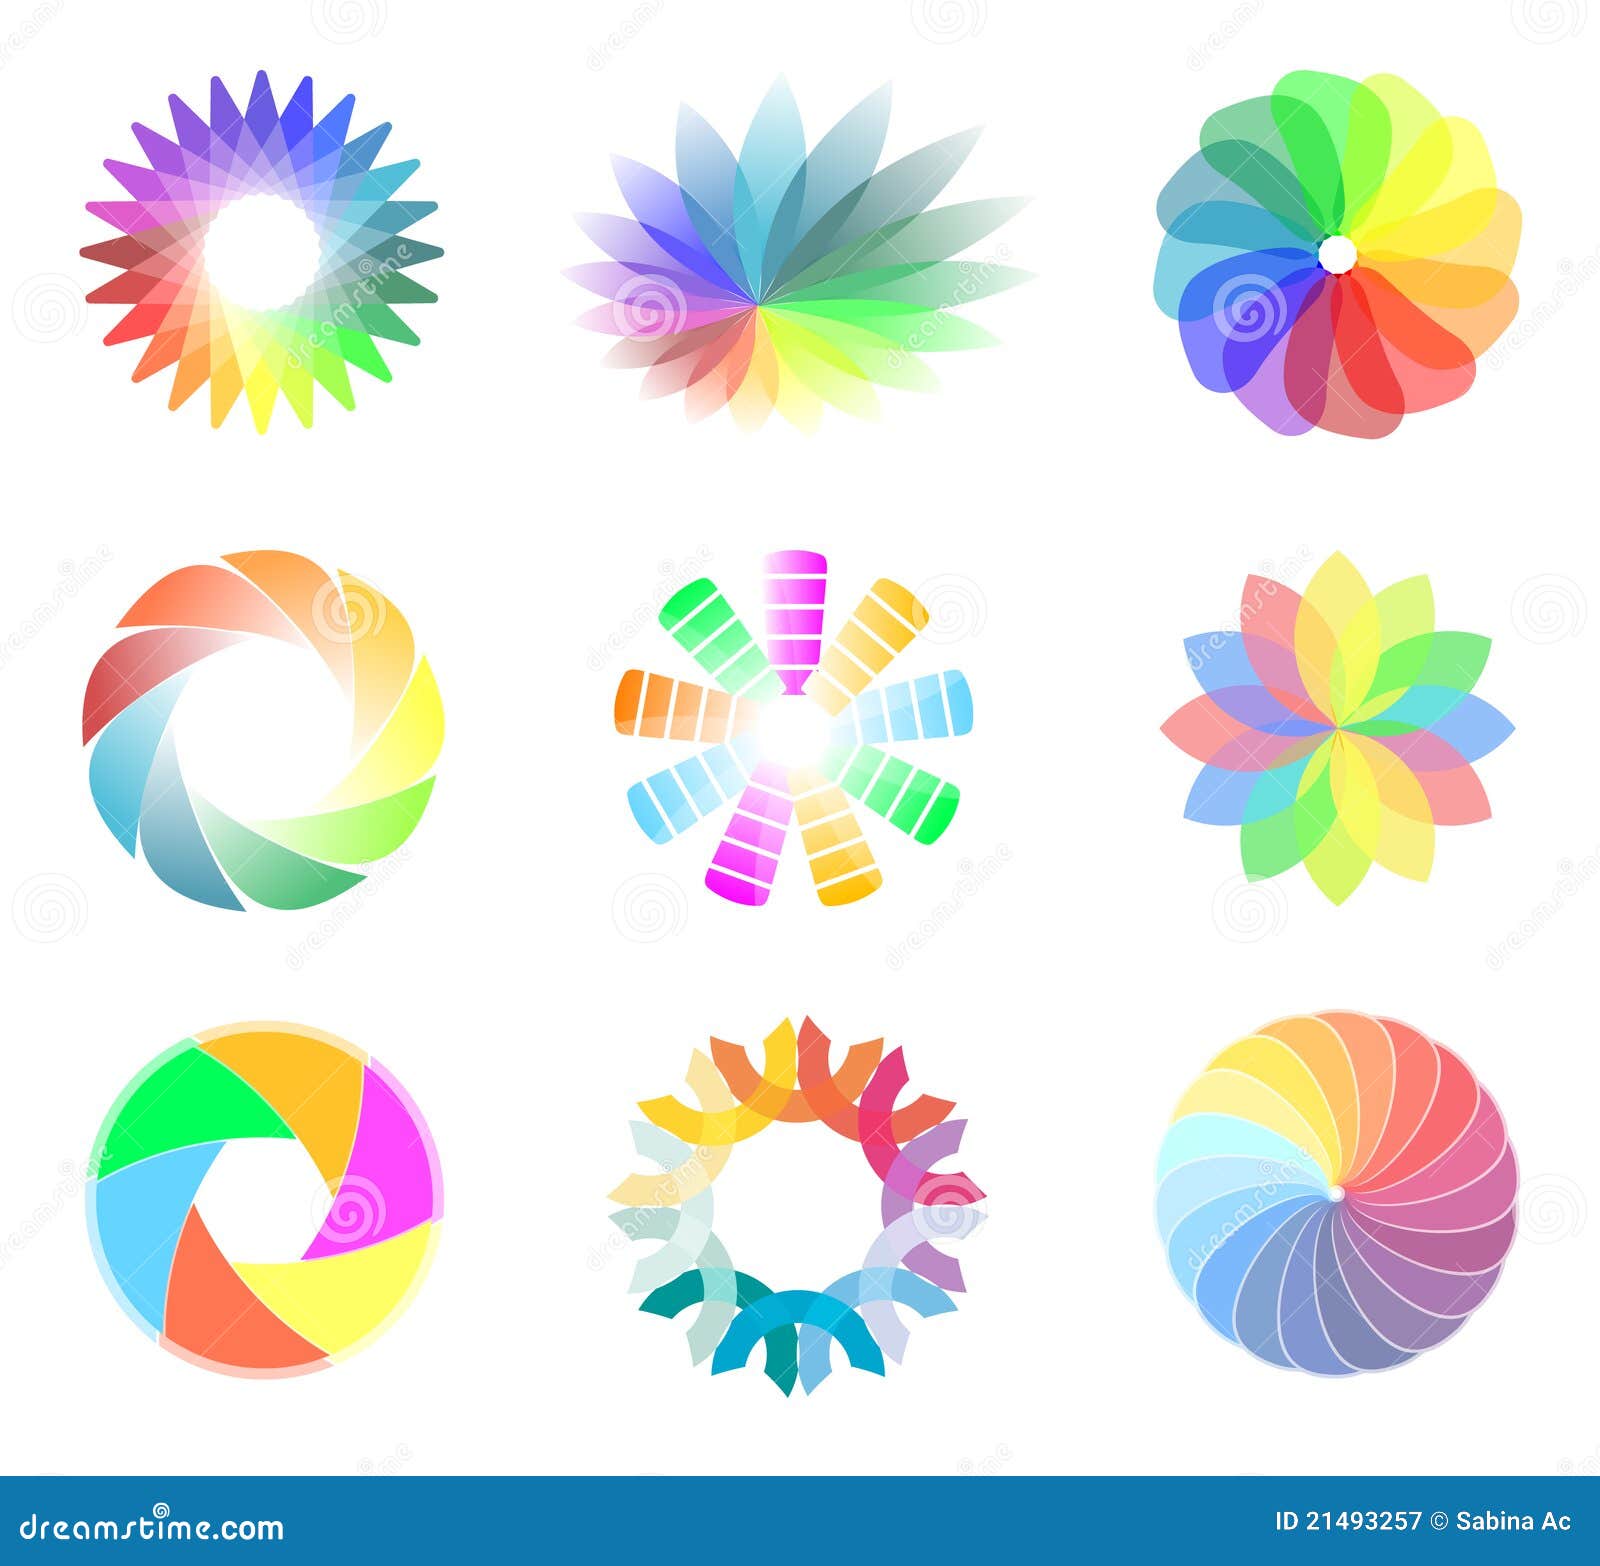 Abstract design elements stock vector. Illustration of logo - 21493257